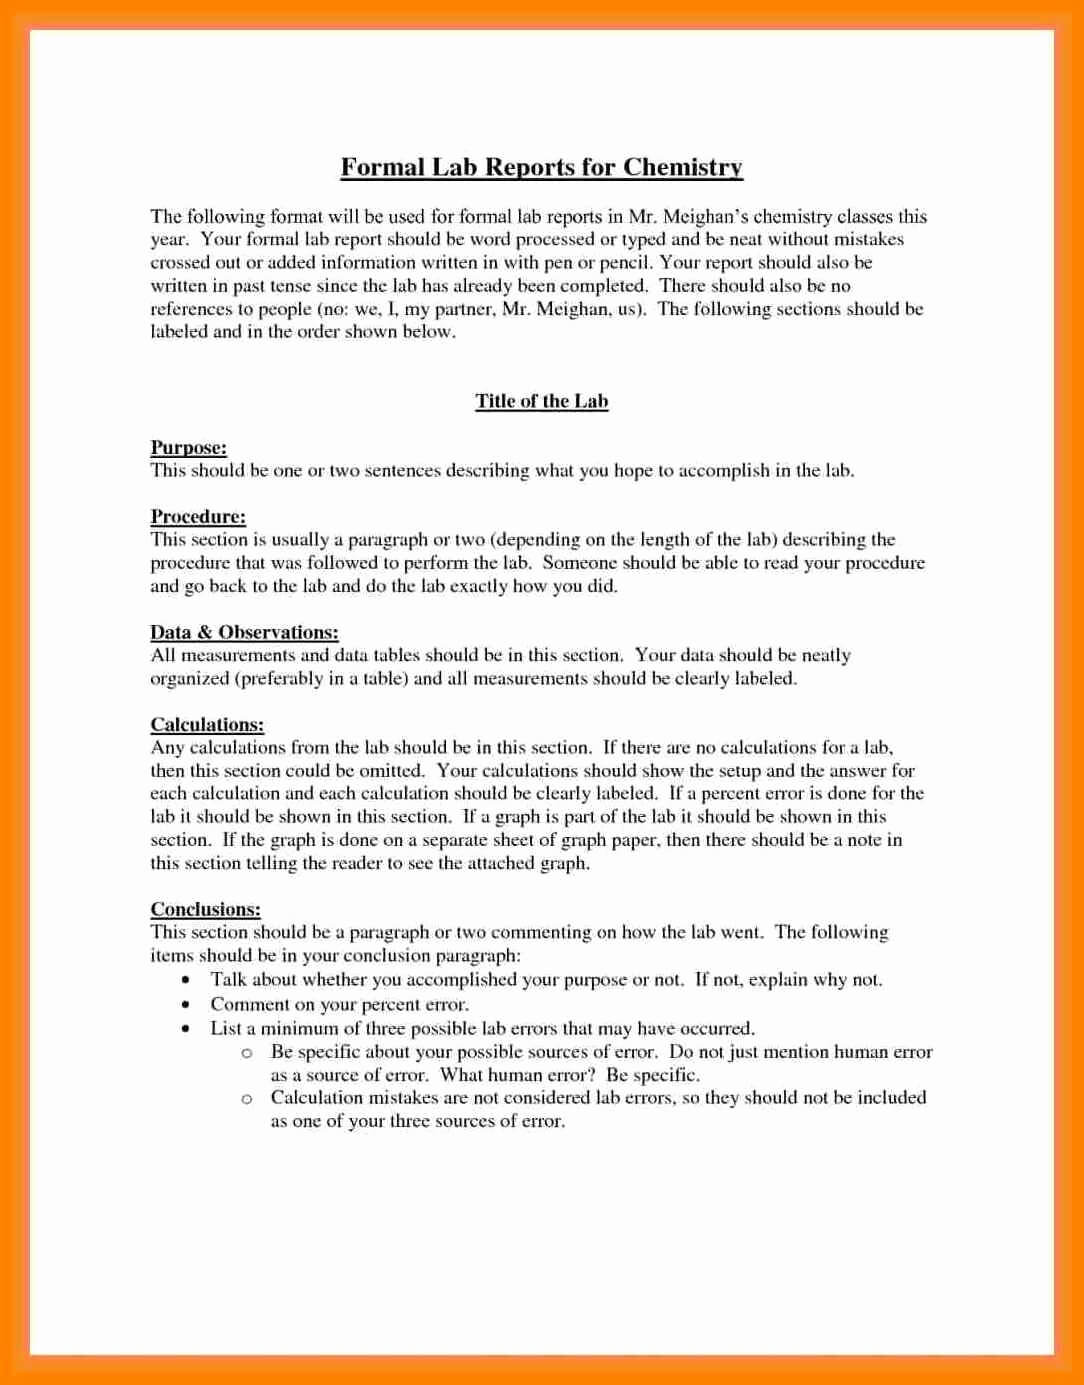 003 Formal Lab Report Example Best Write Up Template Of With Regard To Biology Lab Report Template